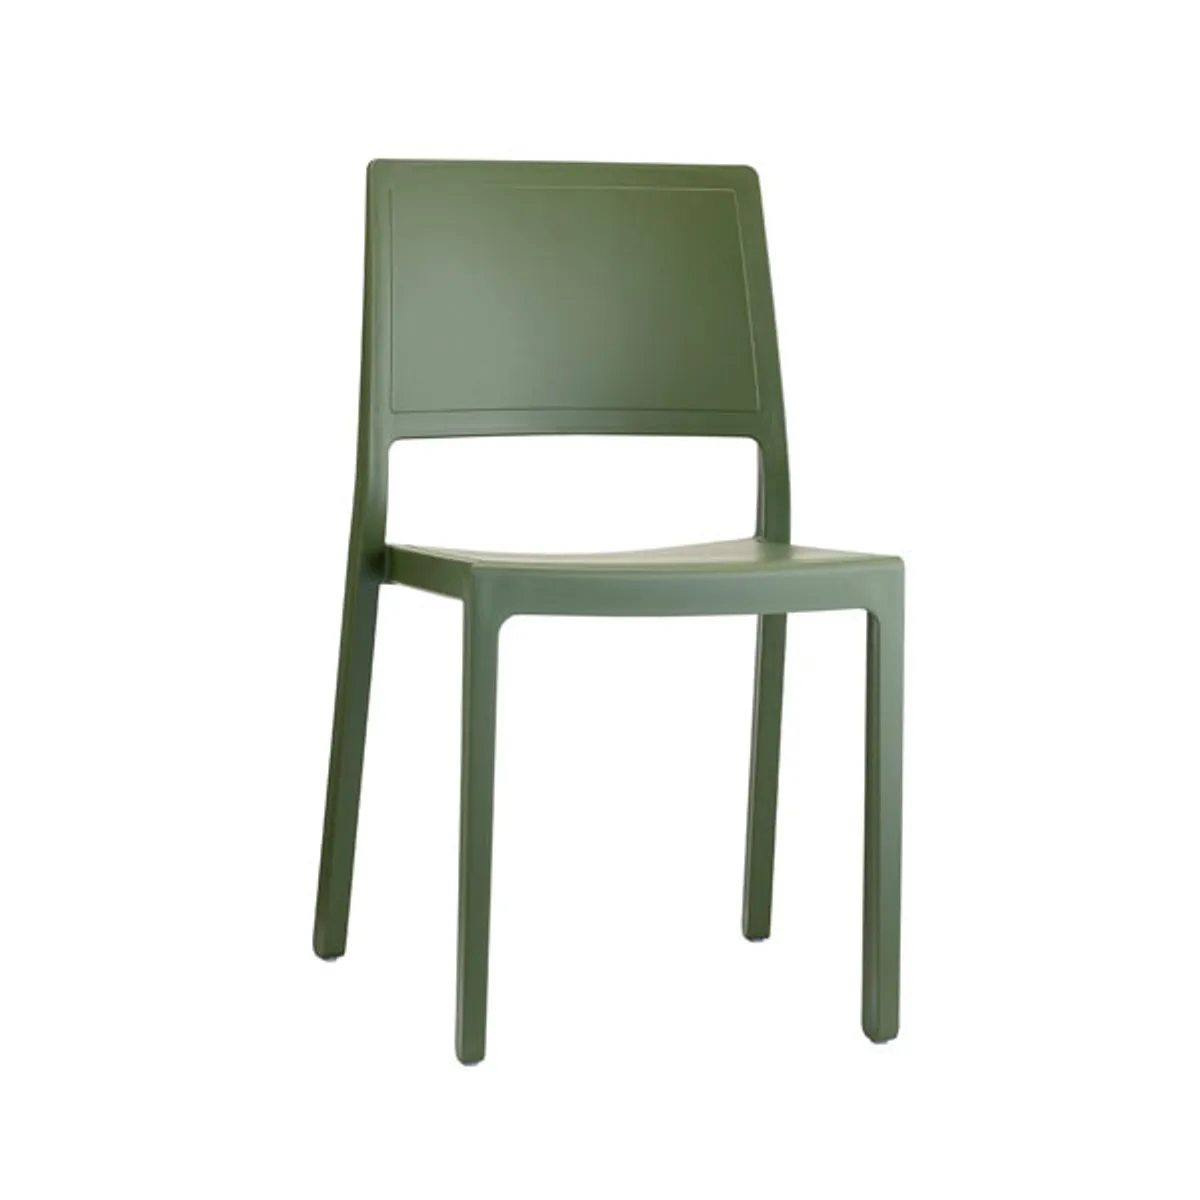 Remi side chair 7 Inside Out Contracts